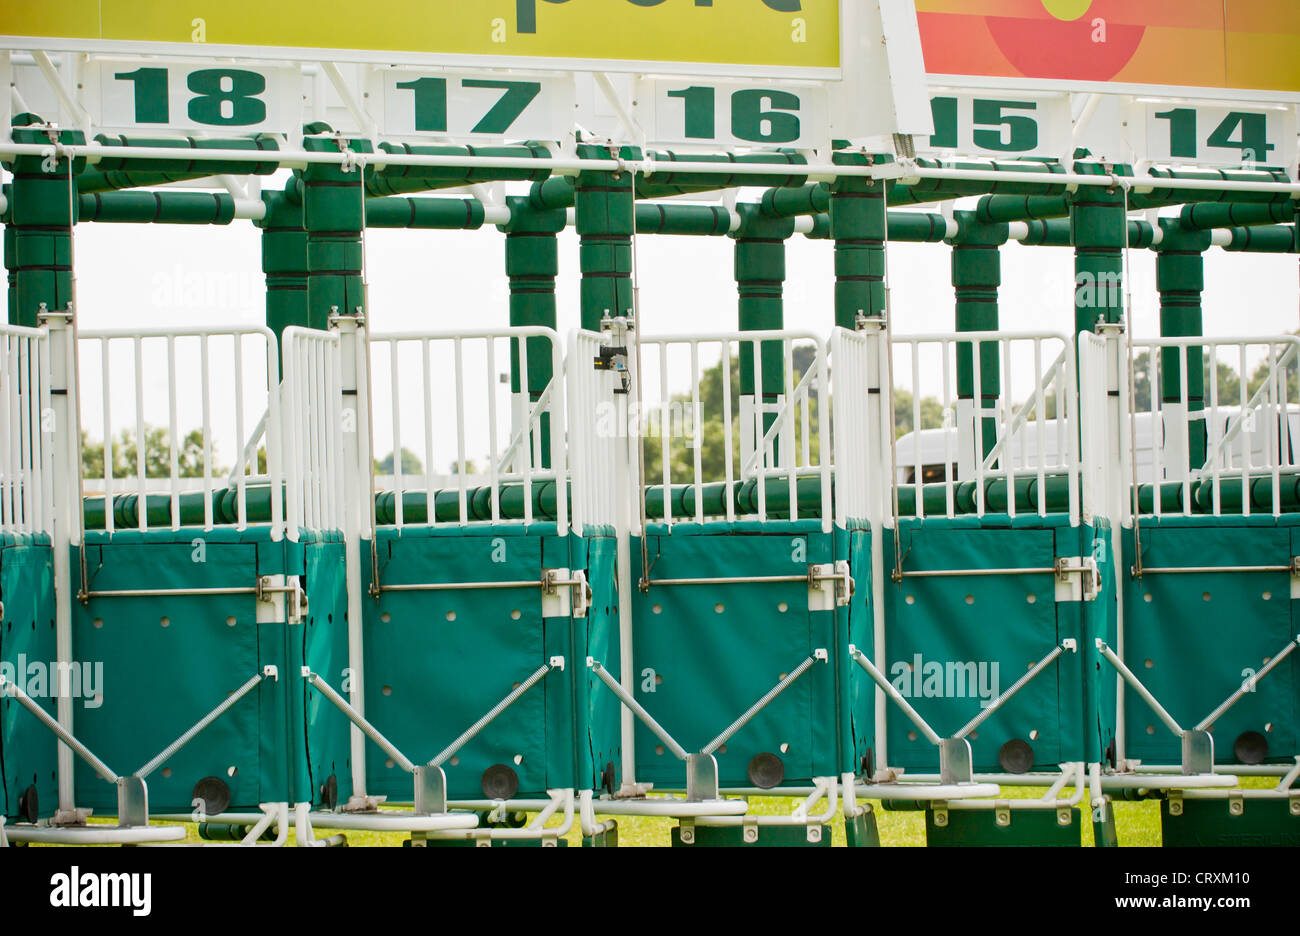 Empty Starting gates for horse racing Stock Photo